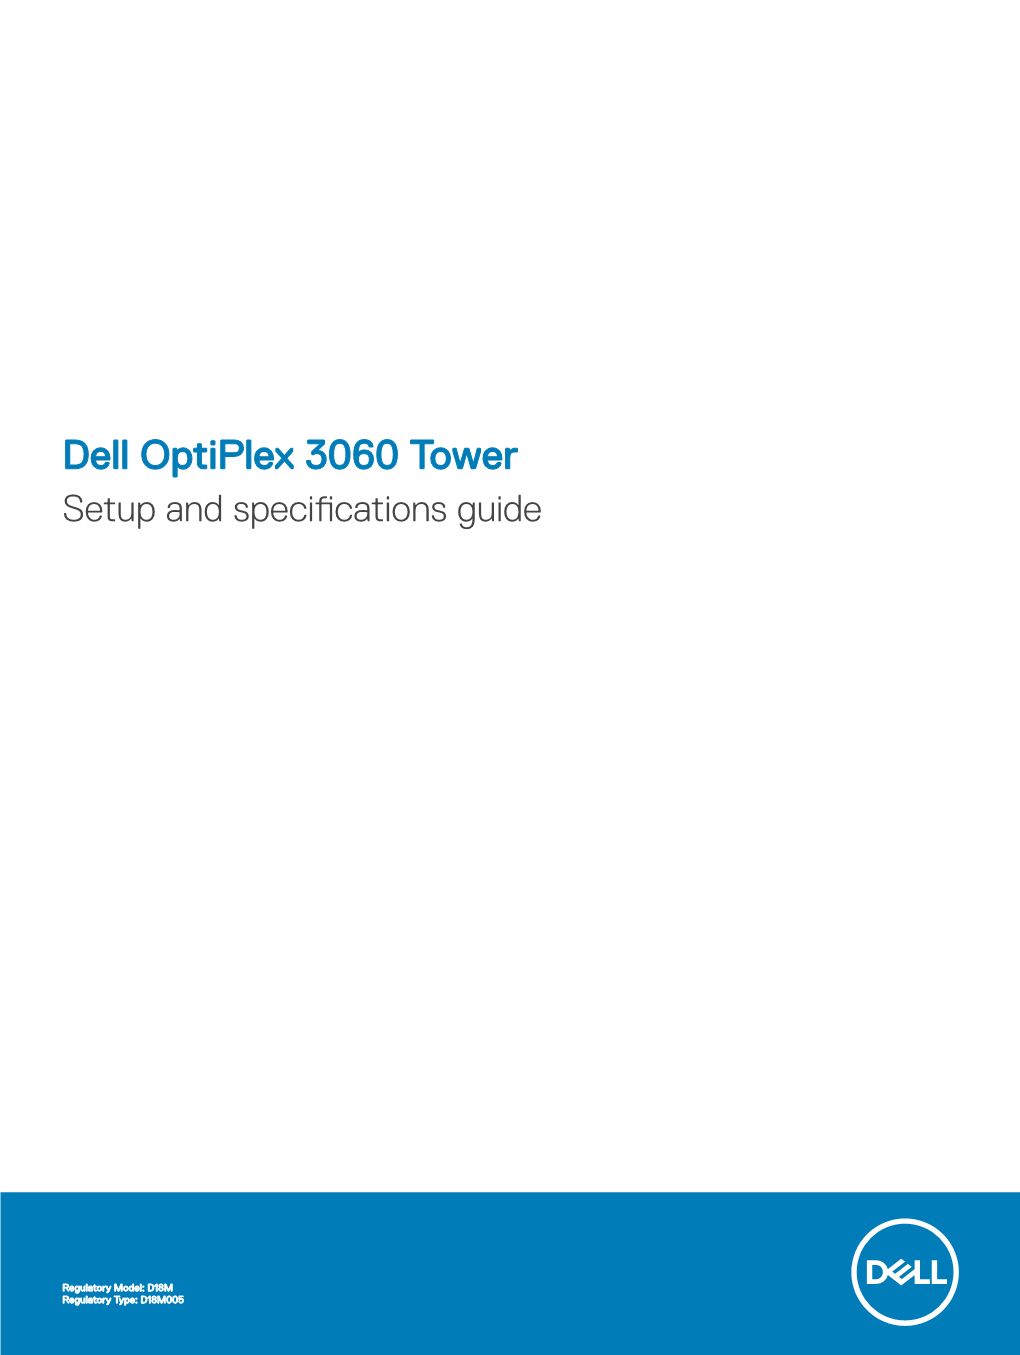 Dell Optiplex 3060 Tower Setup and Specifications Guide